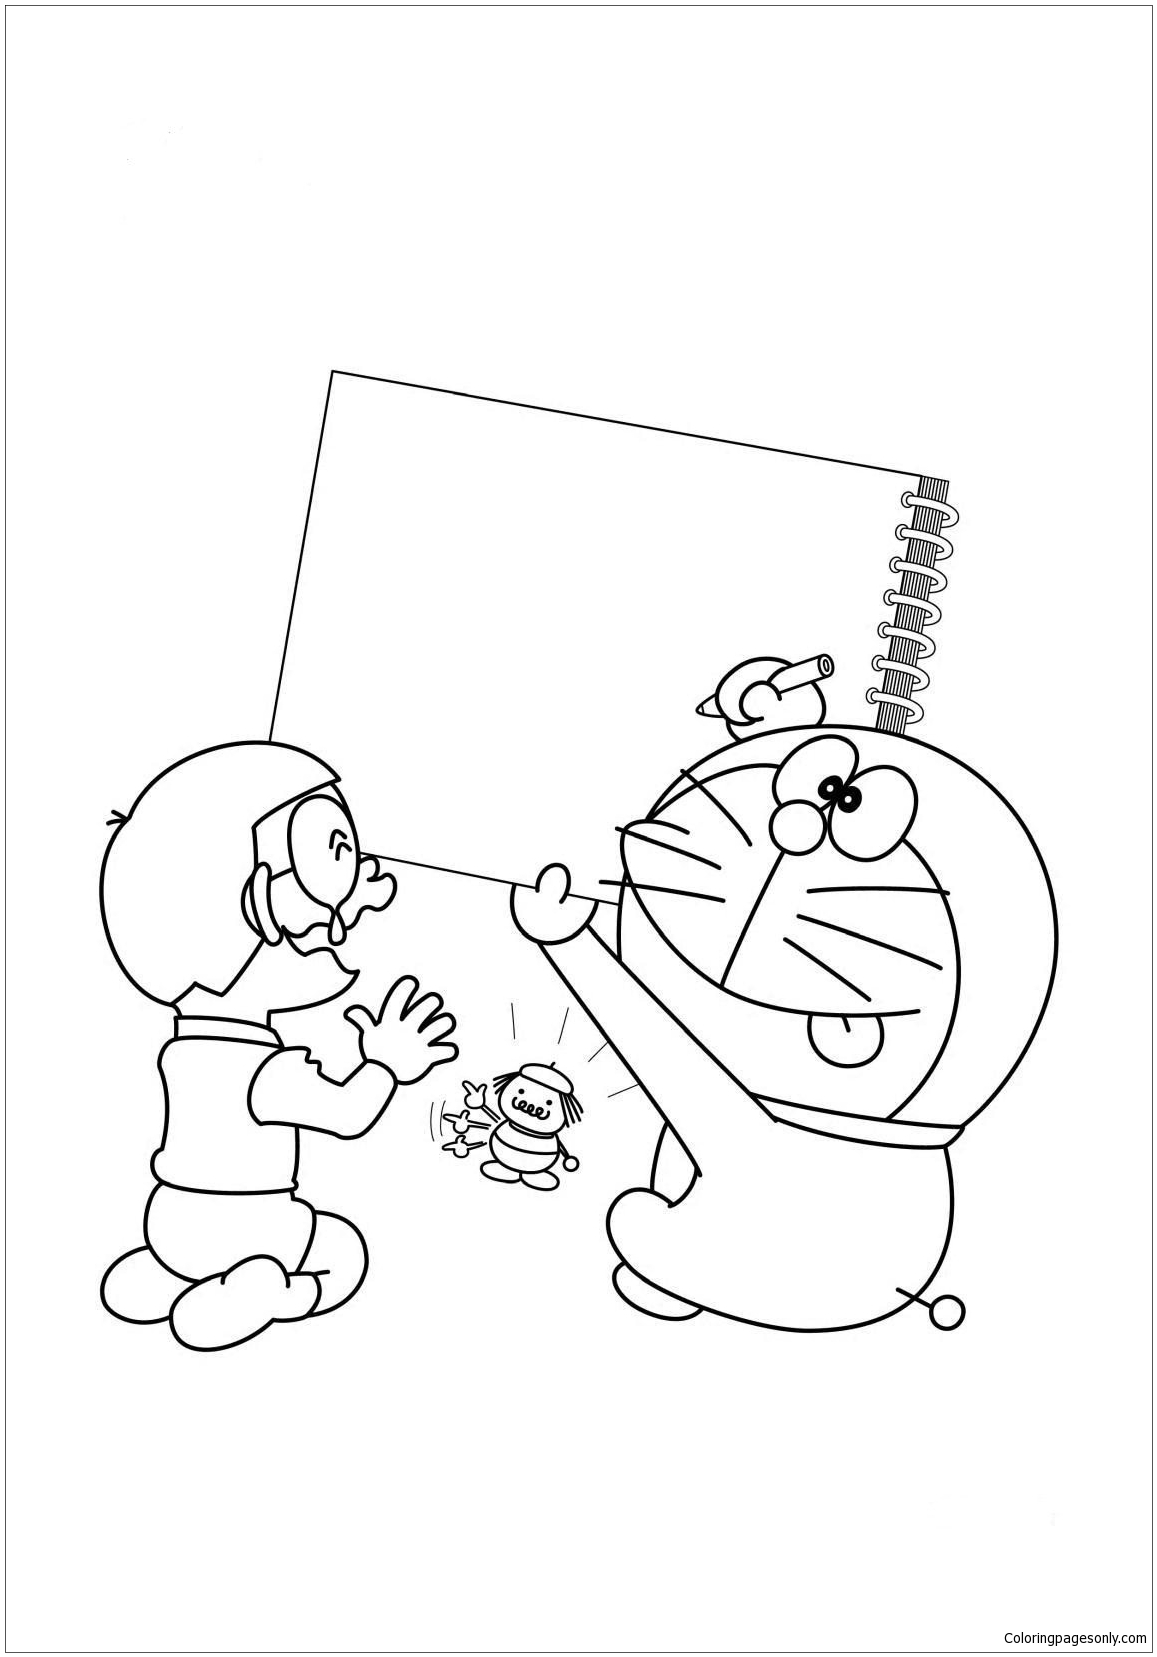 Doraemon Draws For Nobita Coloring Page - Free Coloring Pages Online